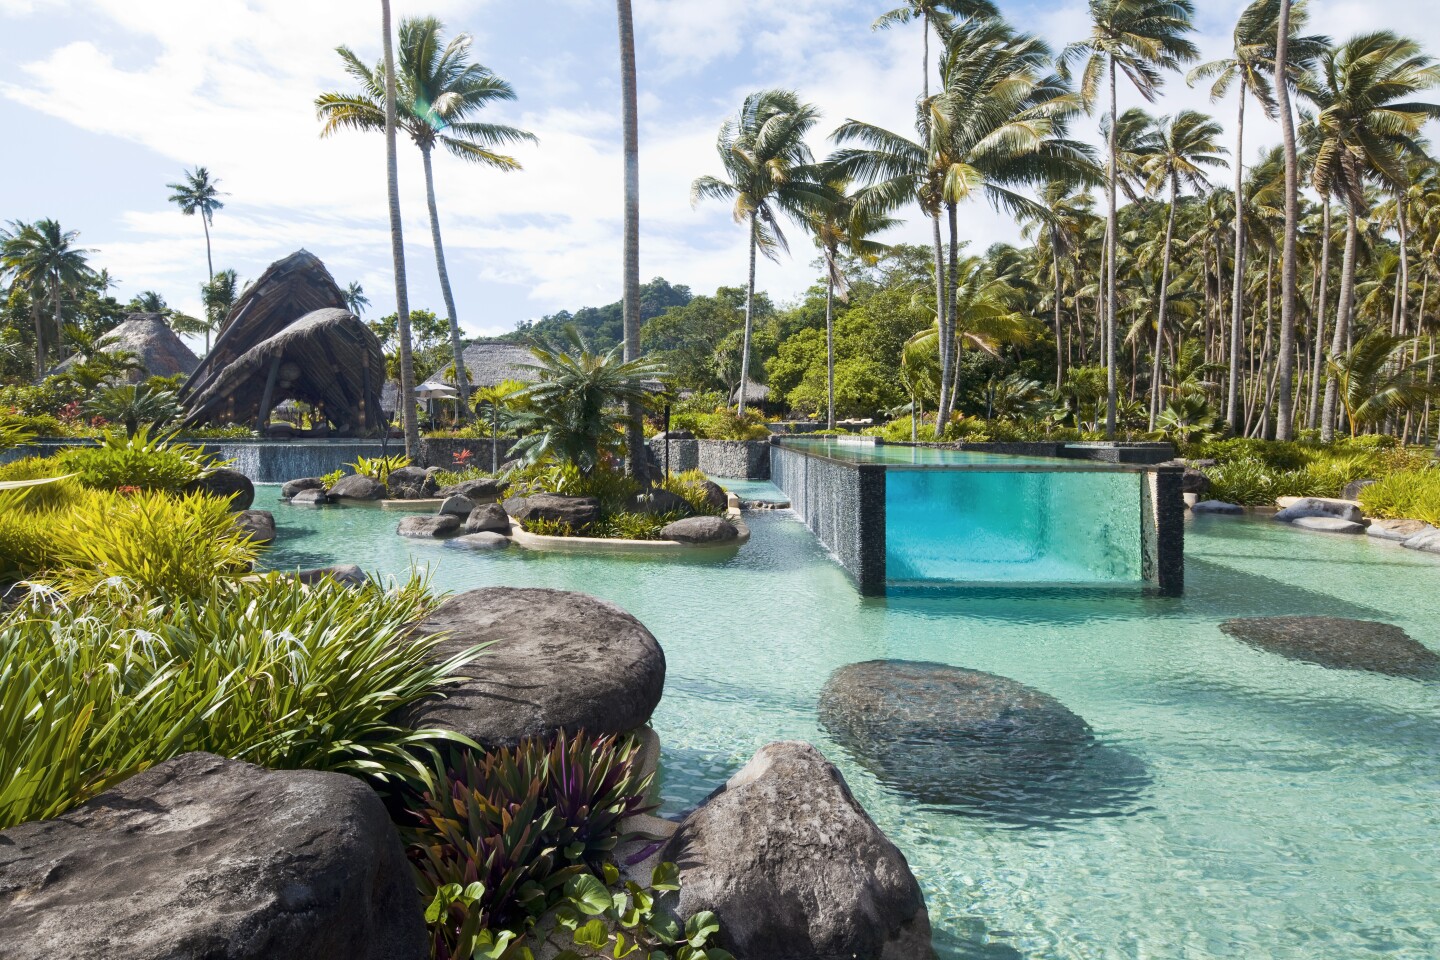 <h2>Como Laucala Island, Fiji</h2> <ul>   <li><b>Location: </b>Fiji </li>   <li><b>Why we love it: </b>18-hole golf course, personal buggies for island exploration, villas scattered around the island for extra privacy</li>   <li><a class="Link" href="https://go.skimresources.com?id=122560X1583085&xs=1&url=https%3A%2F%2Fwww.comohotels.com%2Ffiji%2Fcomo-laucala-island&xcust=PrivateIslands" rel="noopener nofollow sponsored"><b>Book now</b></a> </li>  </ul> <p>Laucala Island has had a wild history: Captain William Bligh (of <i>Bounty </i>infamy) first wrote about it on his ill-fated South Pacific journey, before the seven-mile-long Fijian paradise became a coconut farm and was then purchased by publishing giant Malcolm Forbes in 1972. Red Bull cofounder Dietrich Mateschitz turned the island into a luxury resort, and in 2021, it was taken over by Como Hotels and Resorts. The 25 Residences—stand-alone villas—are scattered around the island, bringing a sense of blissful seclusion, and they each have a private pool, an outdoor bath, a dedicated <i>tau </i>(Fijian for “friend”), and a golf cart for exploring. While you’re at Laucala, you can also play a round of golf on the 18-hole course, ride horses in the surf, or take an excursion on a classic 1970s sailing yacht. </p>